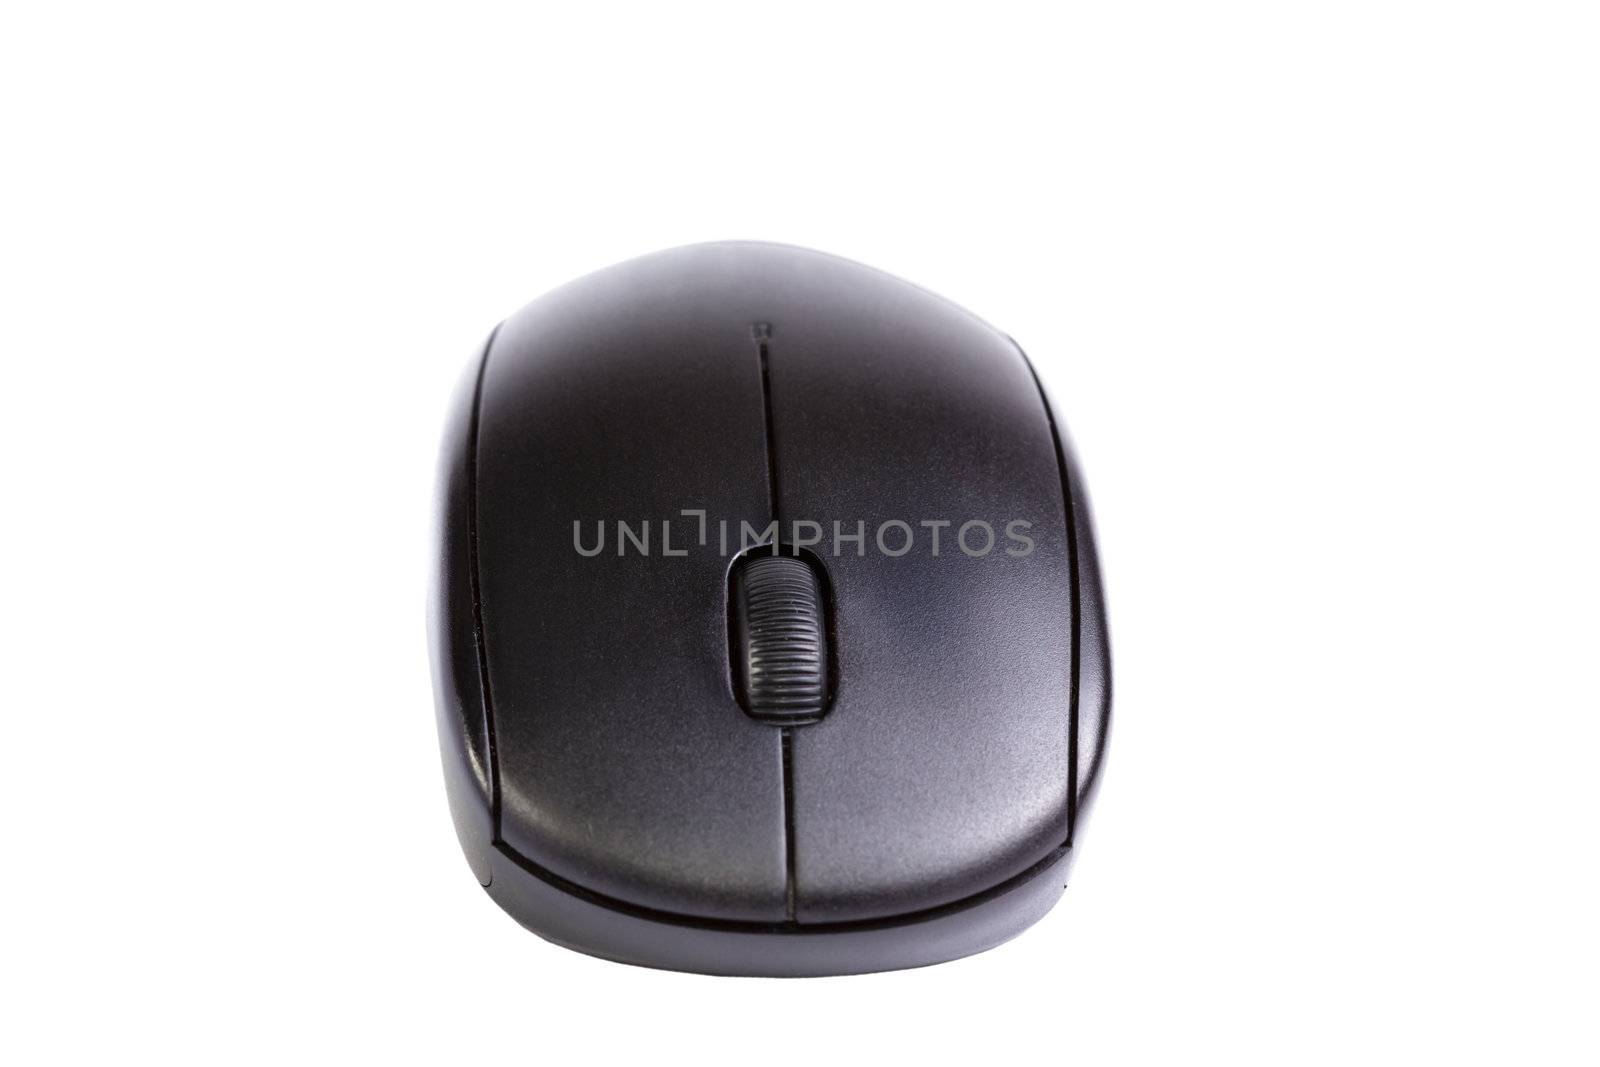 Black wireless computer mouse on a white background